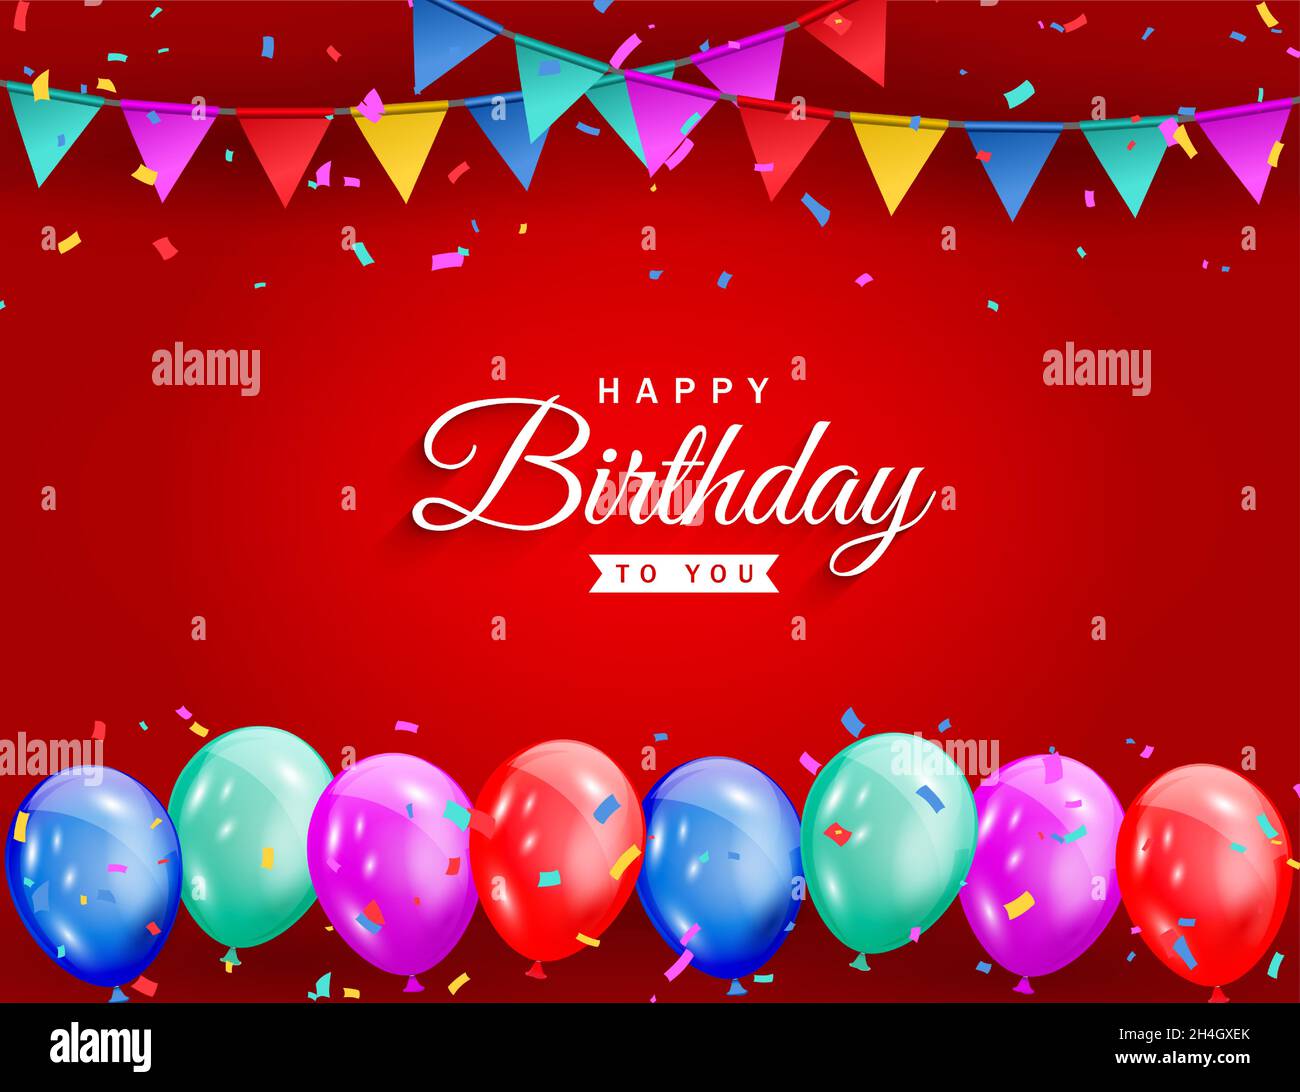 Red Birthday Background Images  Free Download on Freepik